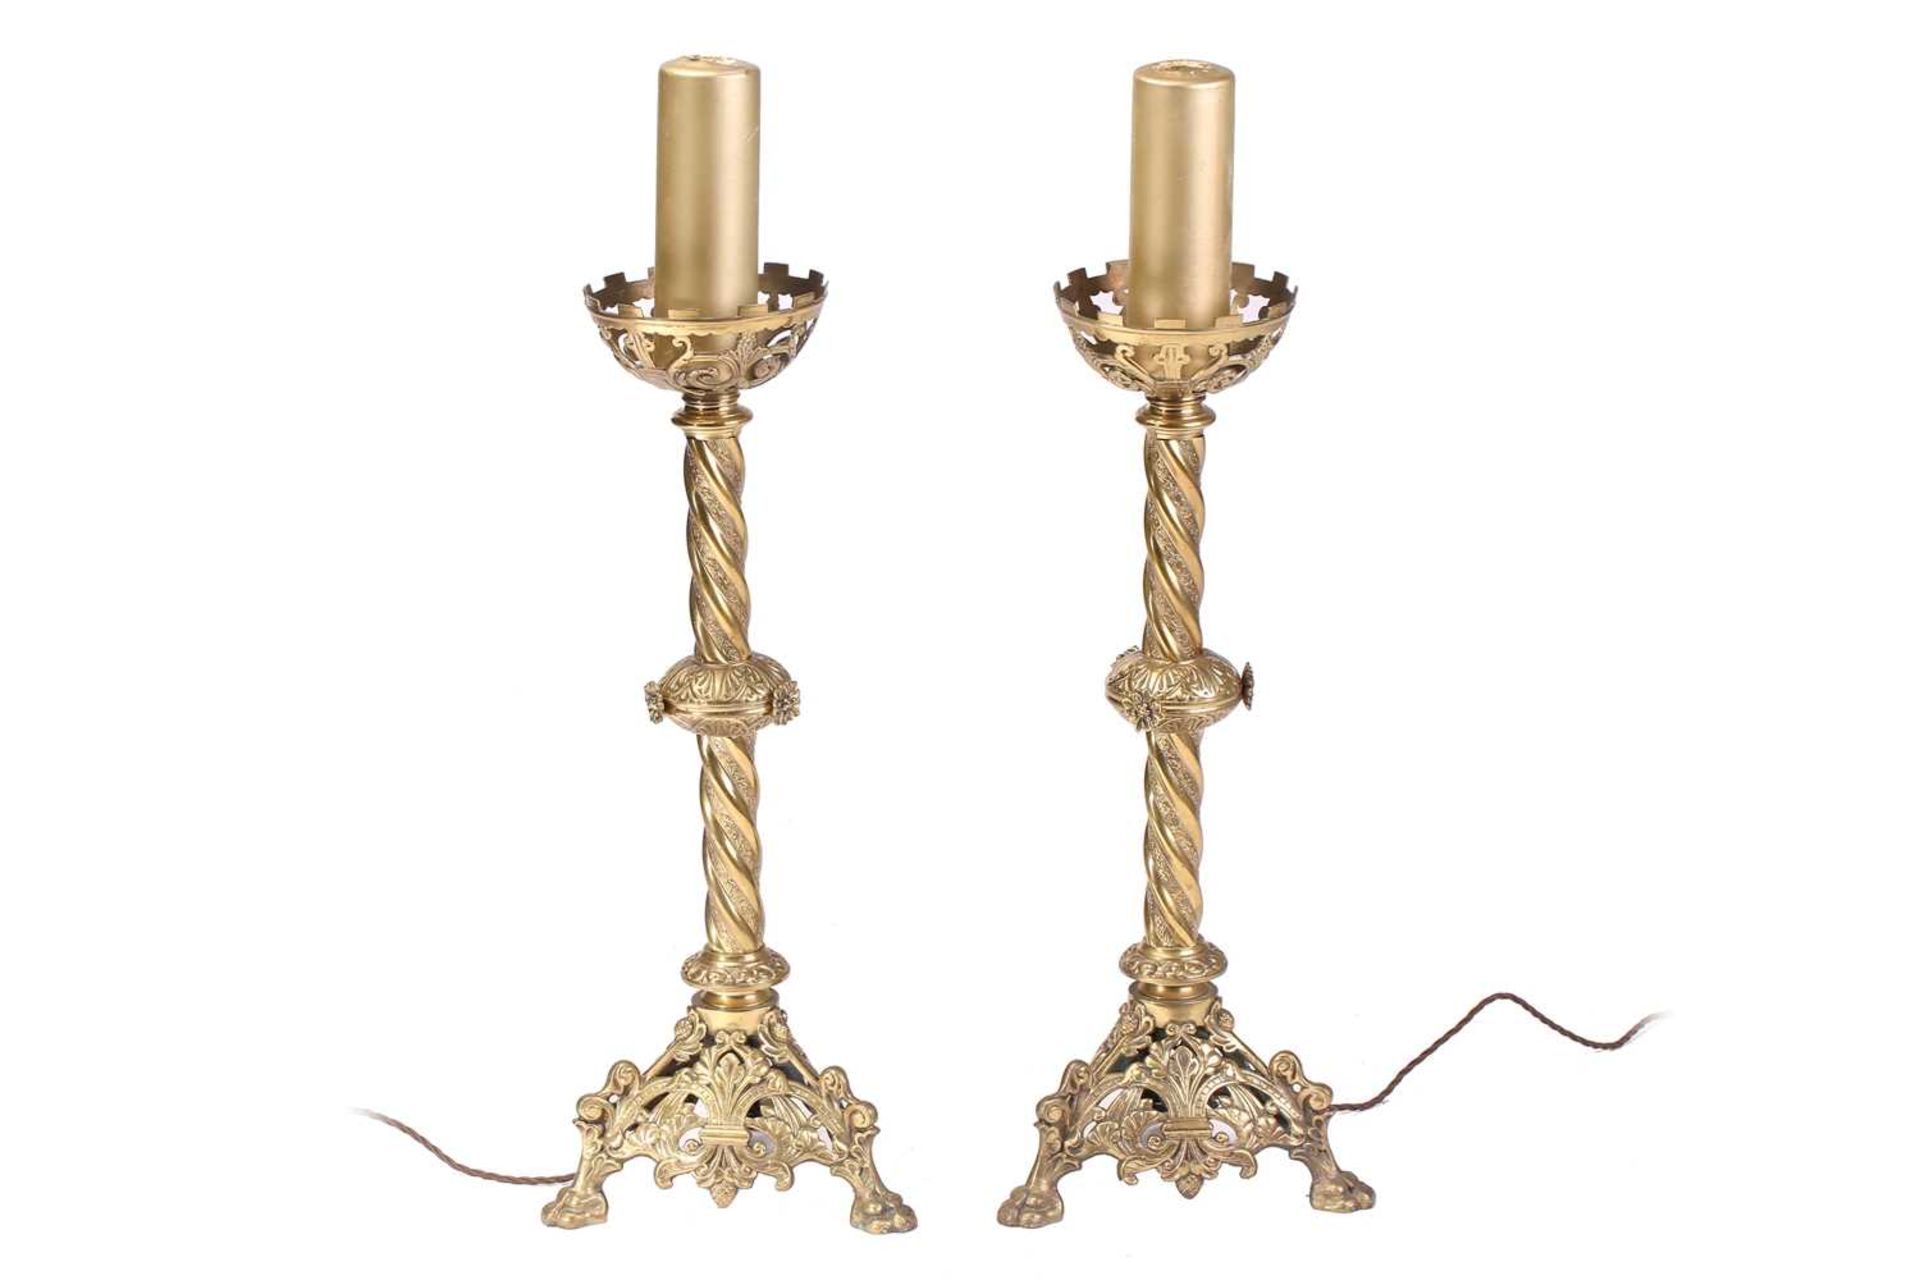 A pair of 19th-century "Ecclesiastic- Gothic" gilt brass table lamps with pierced cup drip pans